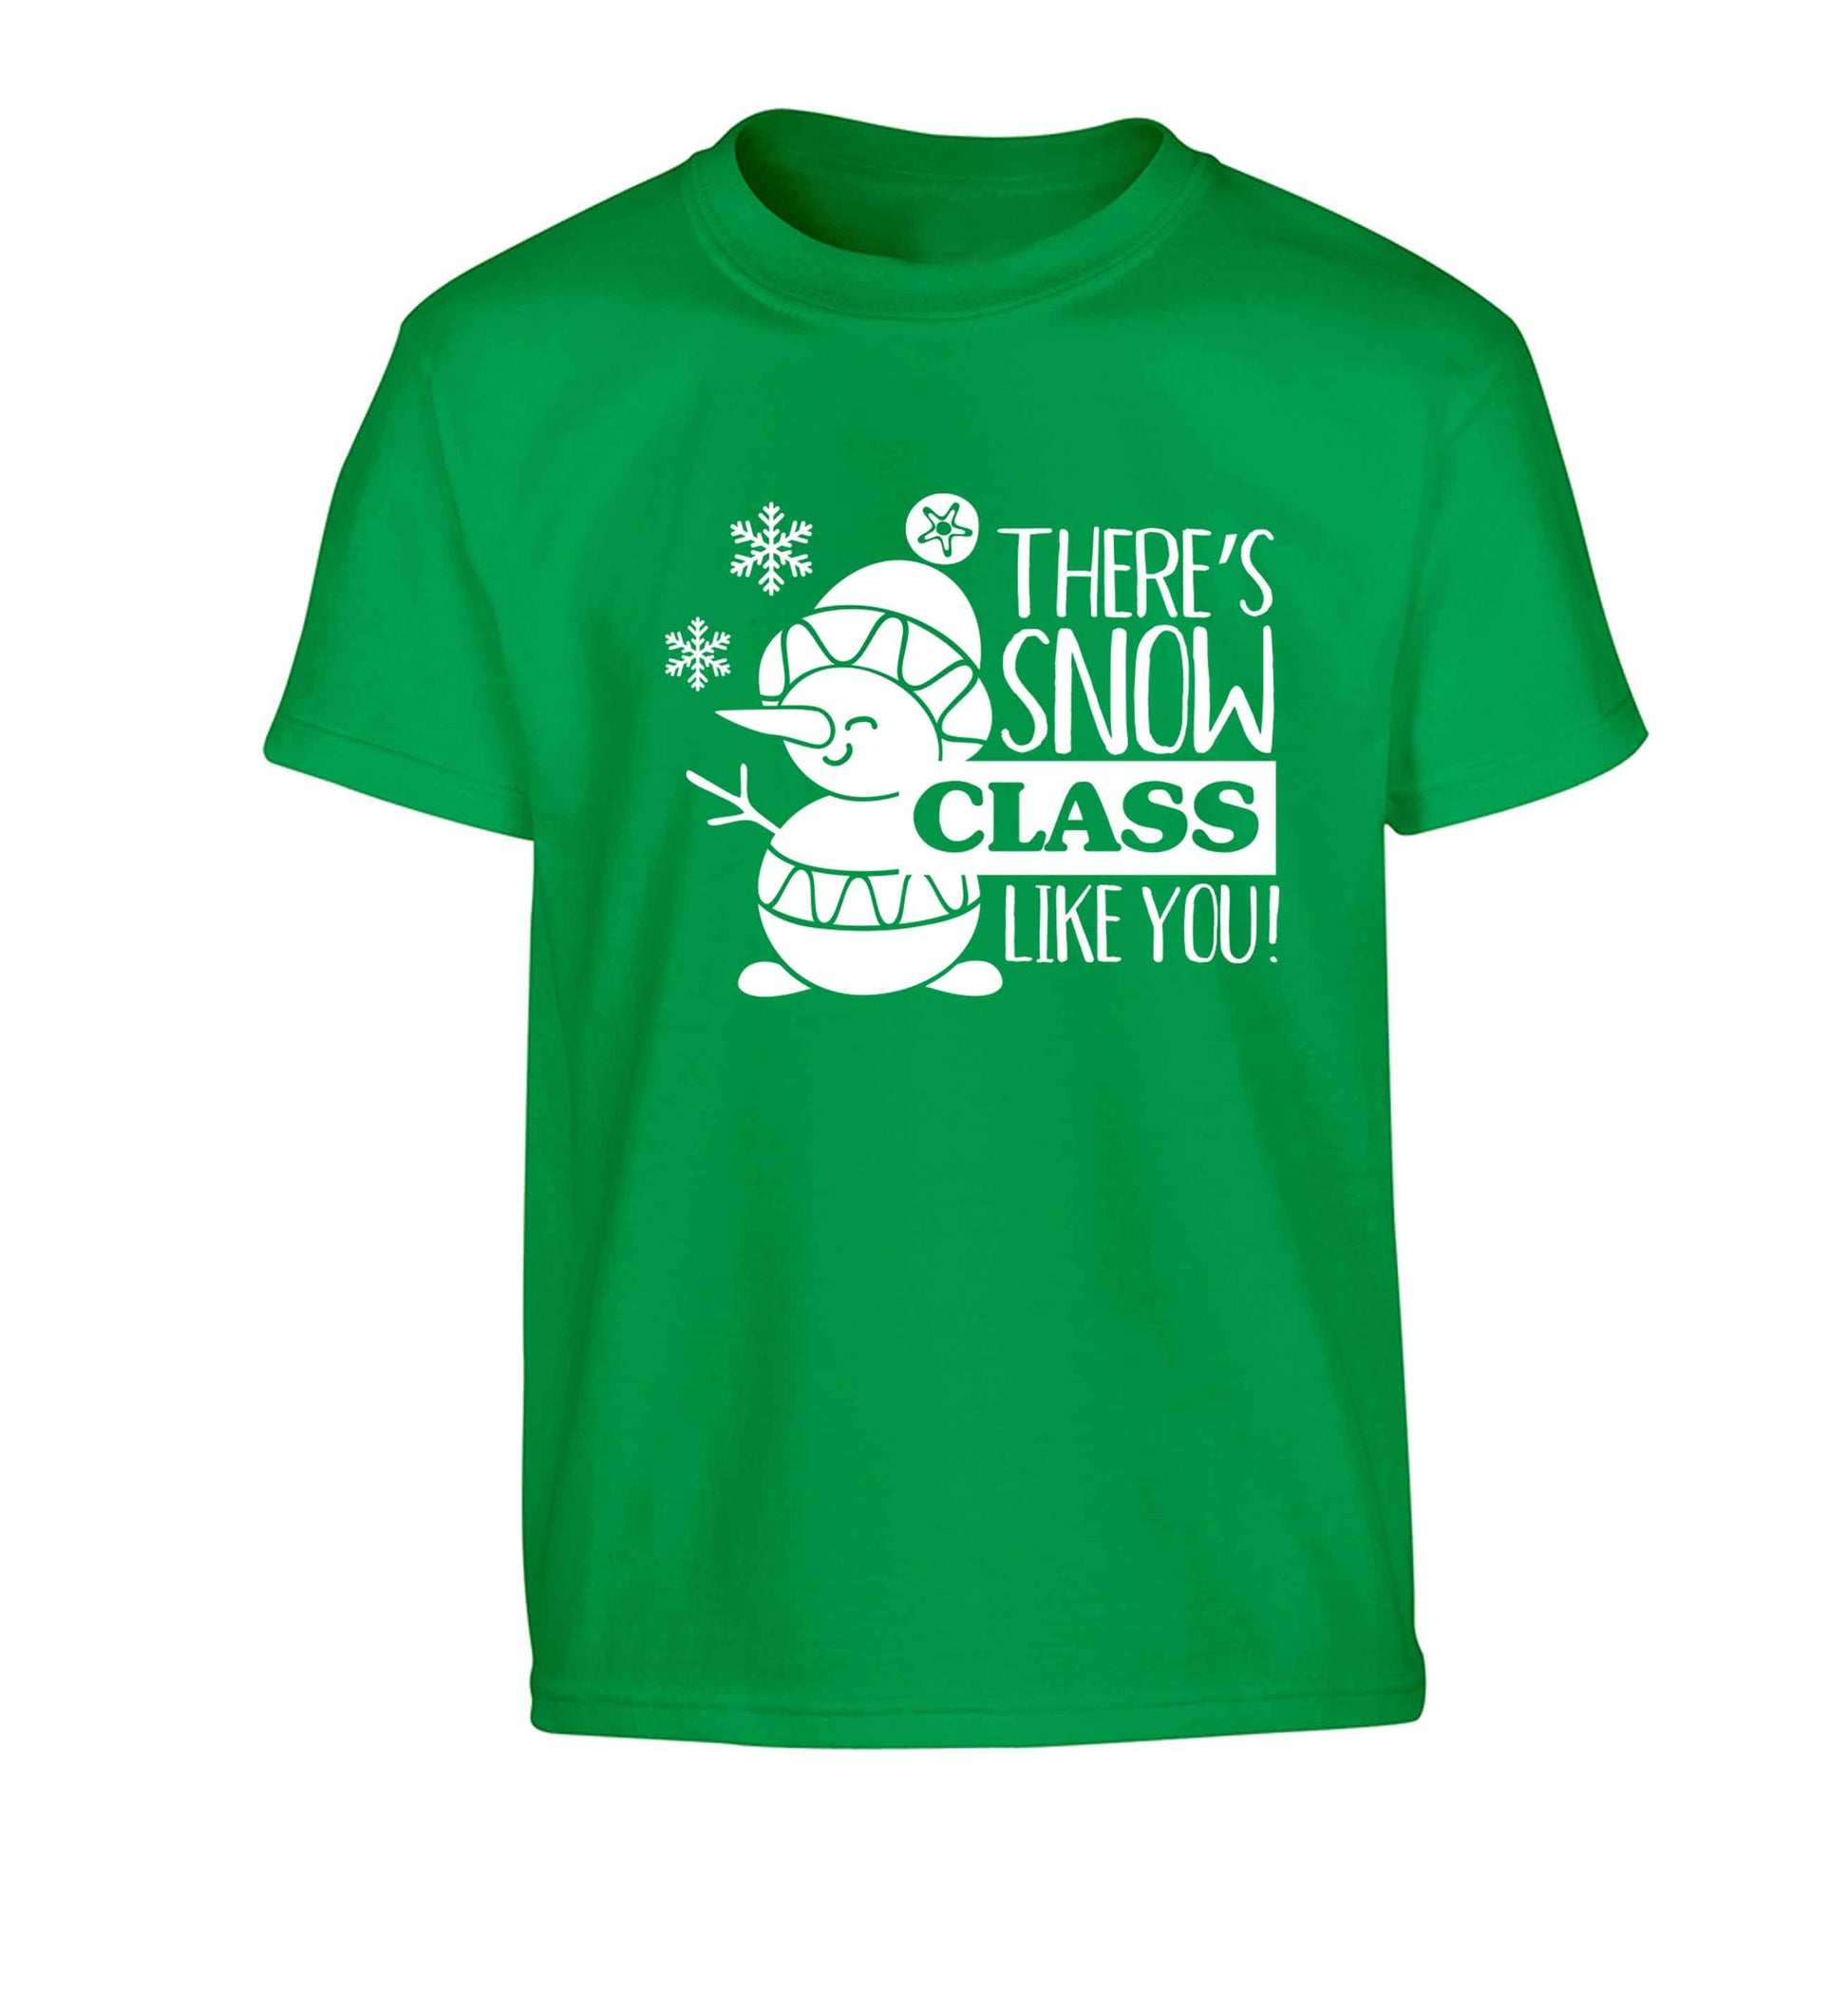 There's snow class like you Children's green Tshirt 12-13 Years